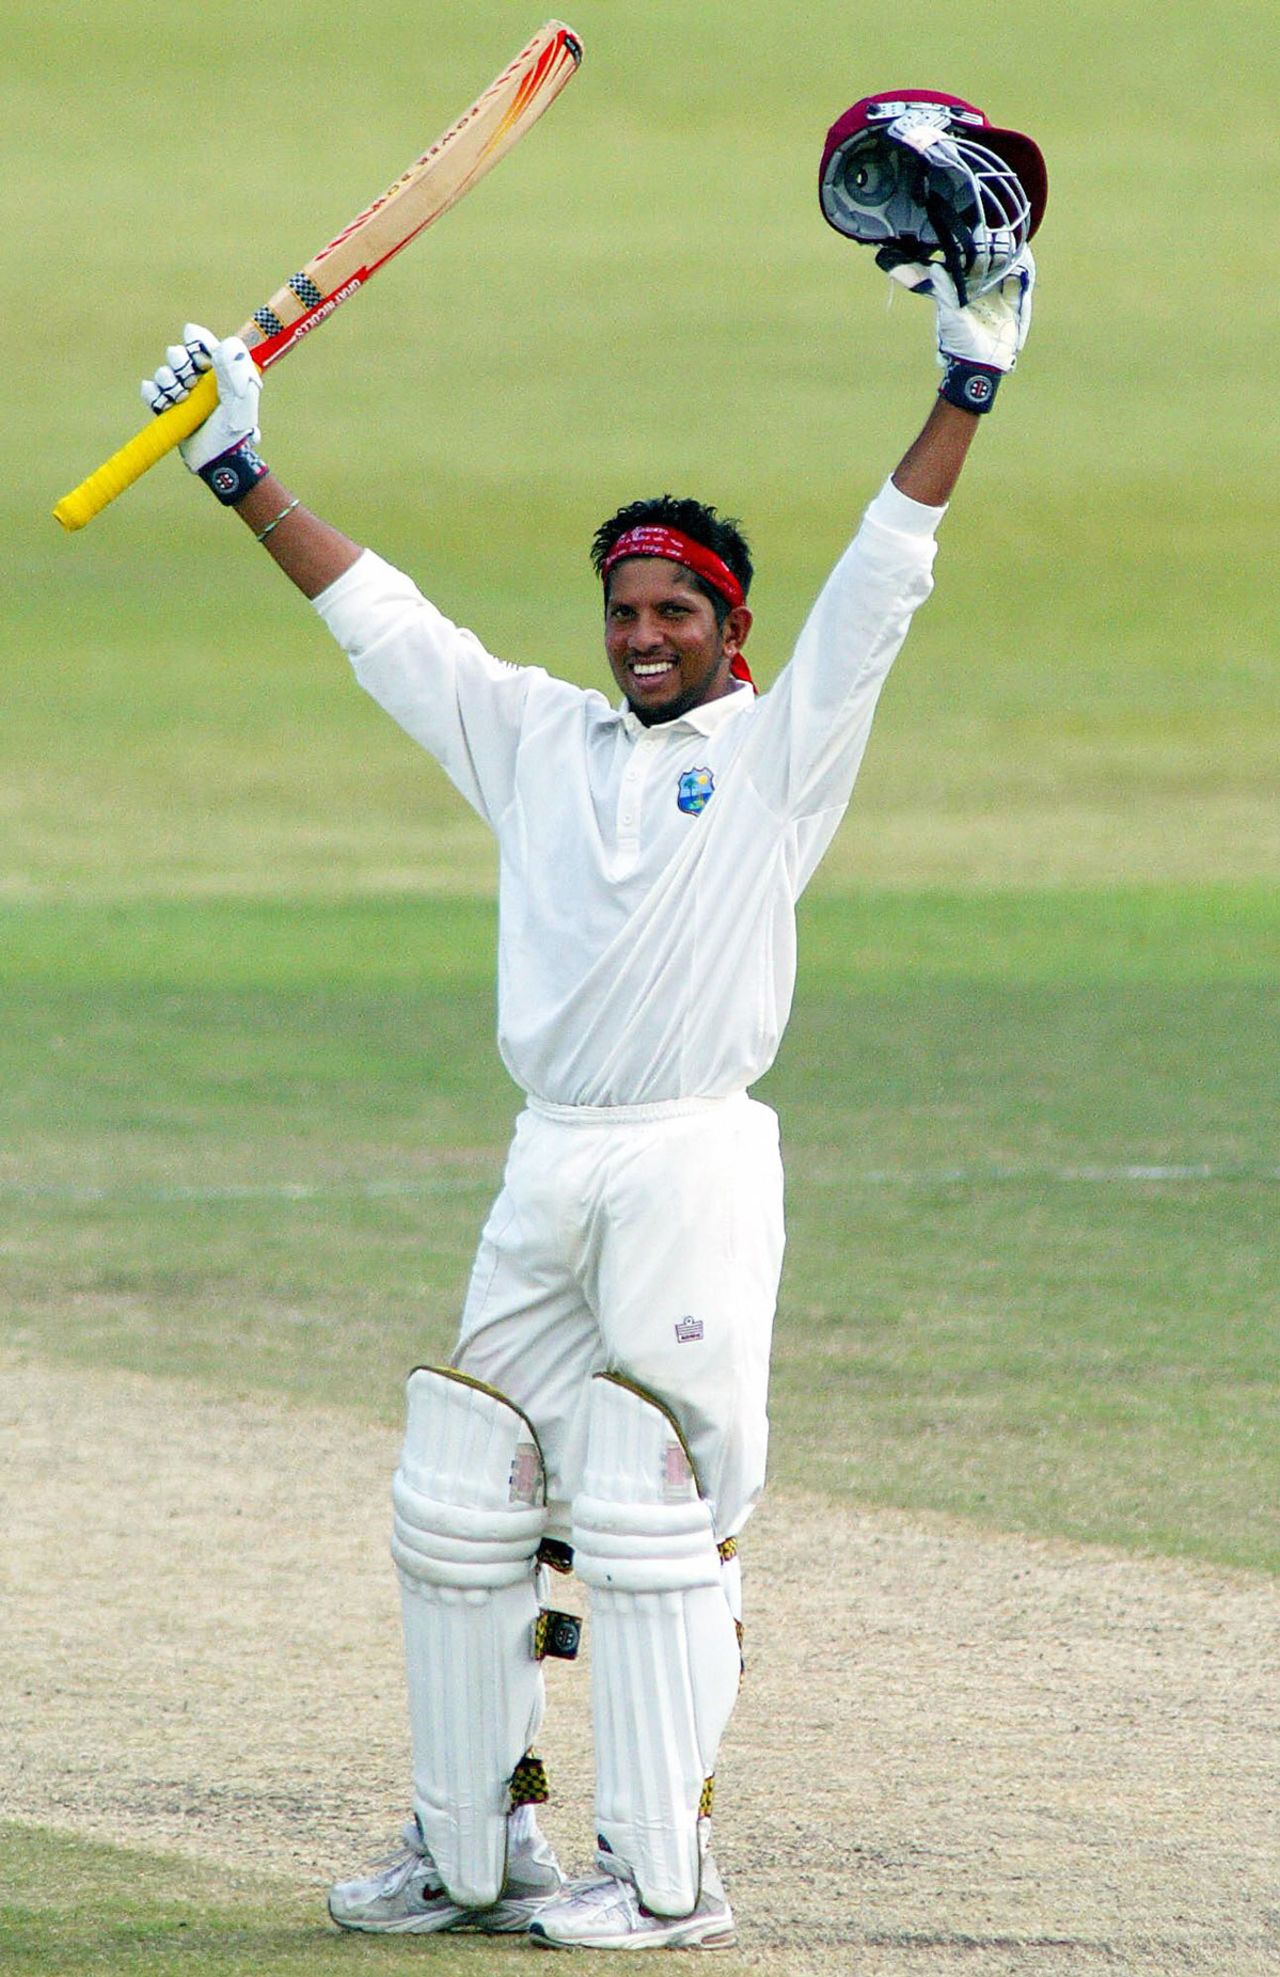 Ramnaresh Sarwan celebrates his hundred, South Africa v West Indies, 2nd Test, Durban, 4th day, December 29, 2003